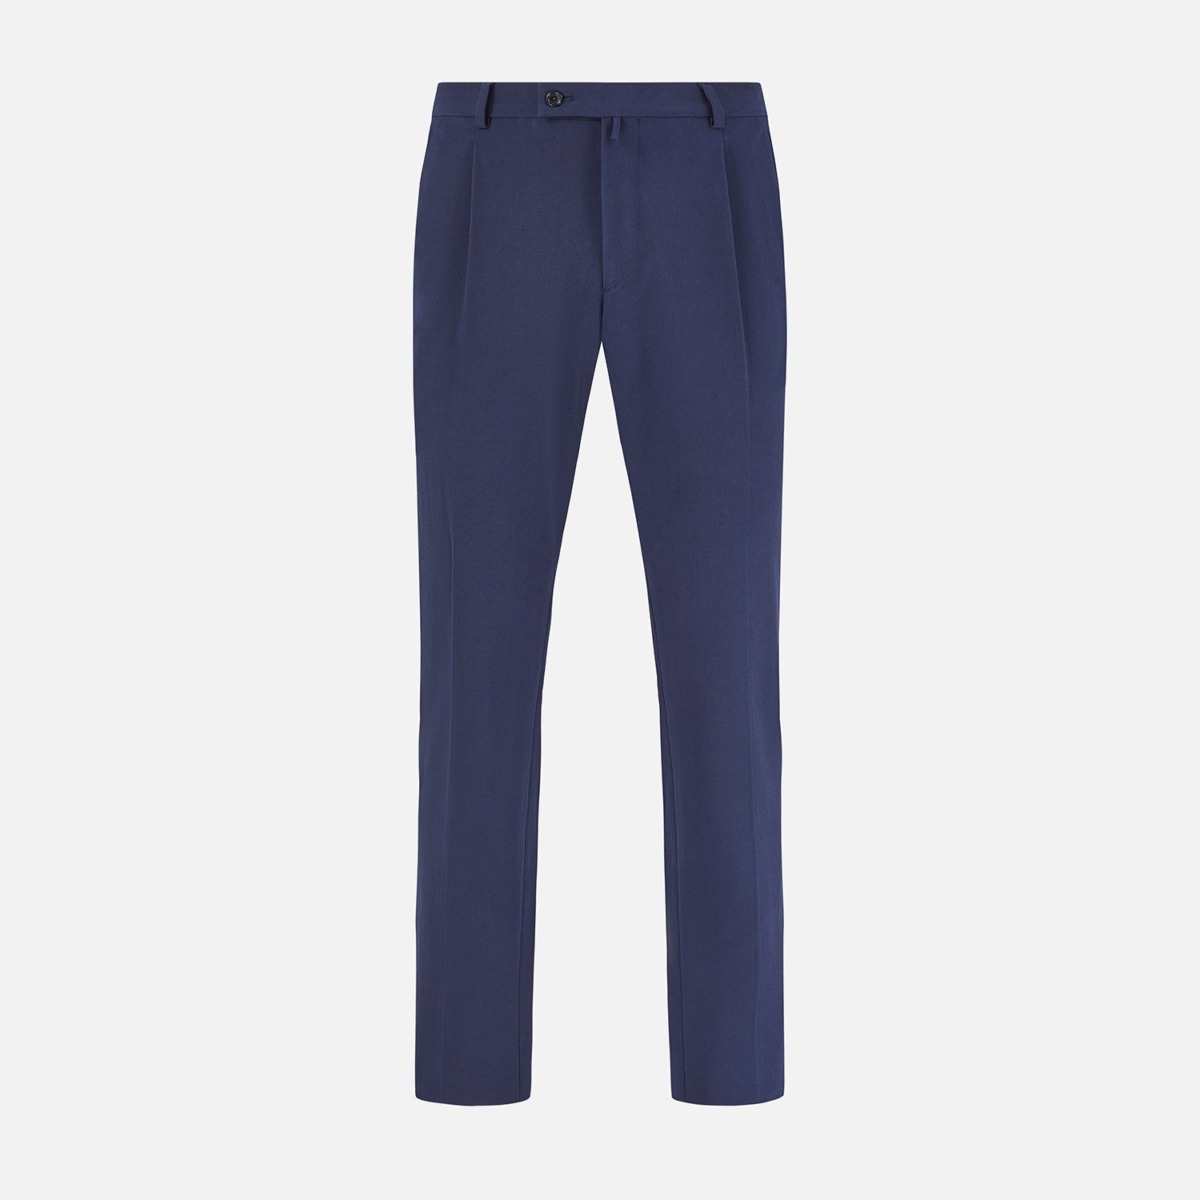 Turnbull And Asser - Gents Trousers Blue - Turnbull & Asser GOOFASH